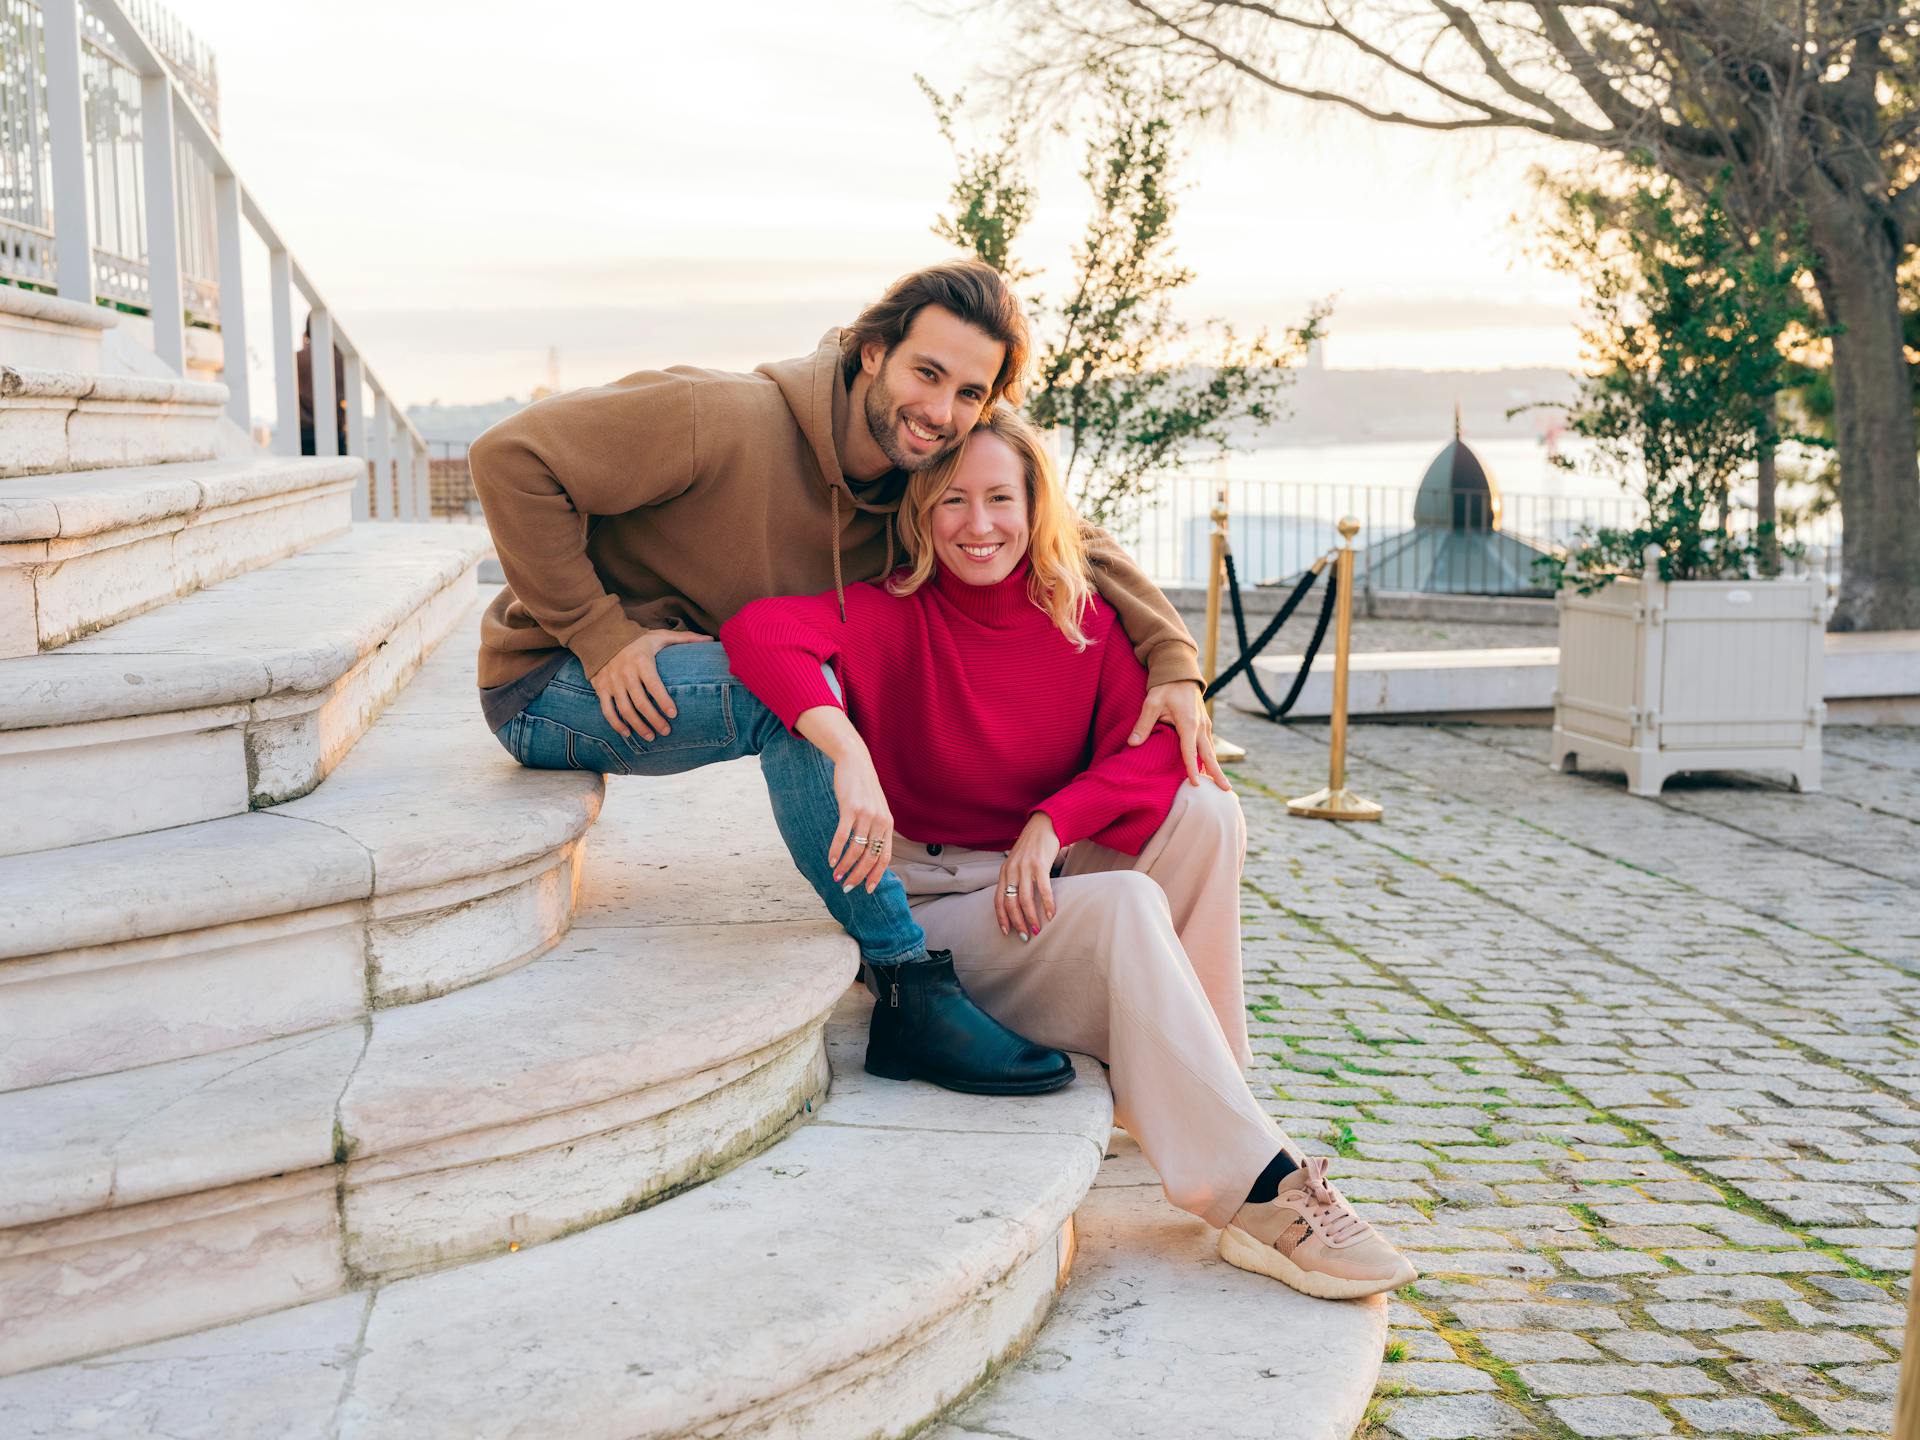 A happy couple sitting on the stairs | Source: Pexels